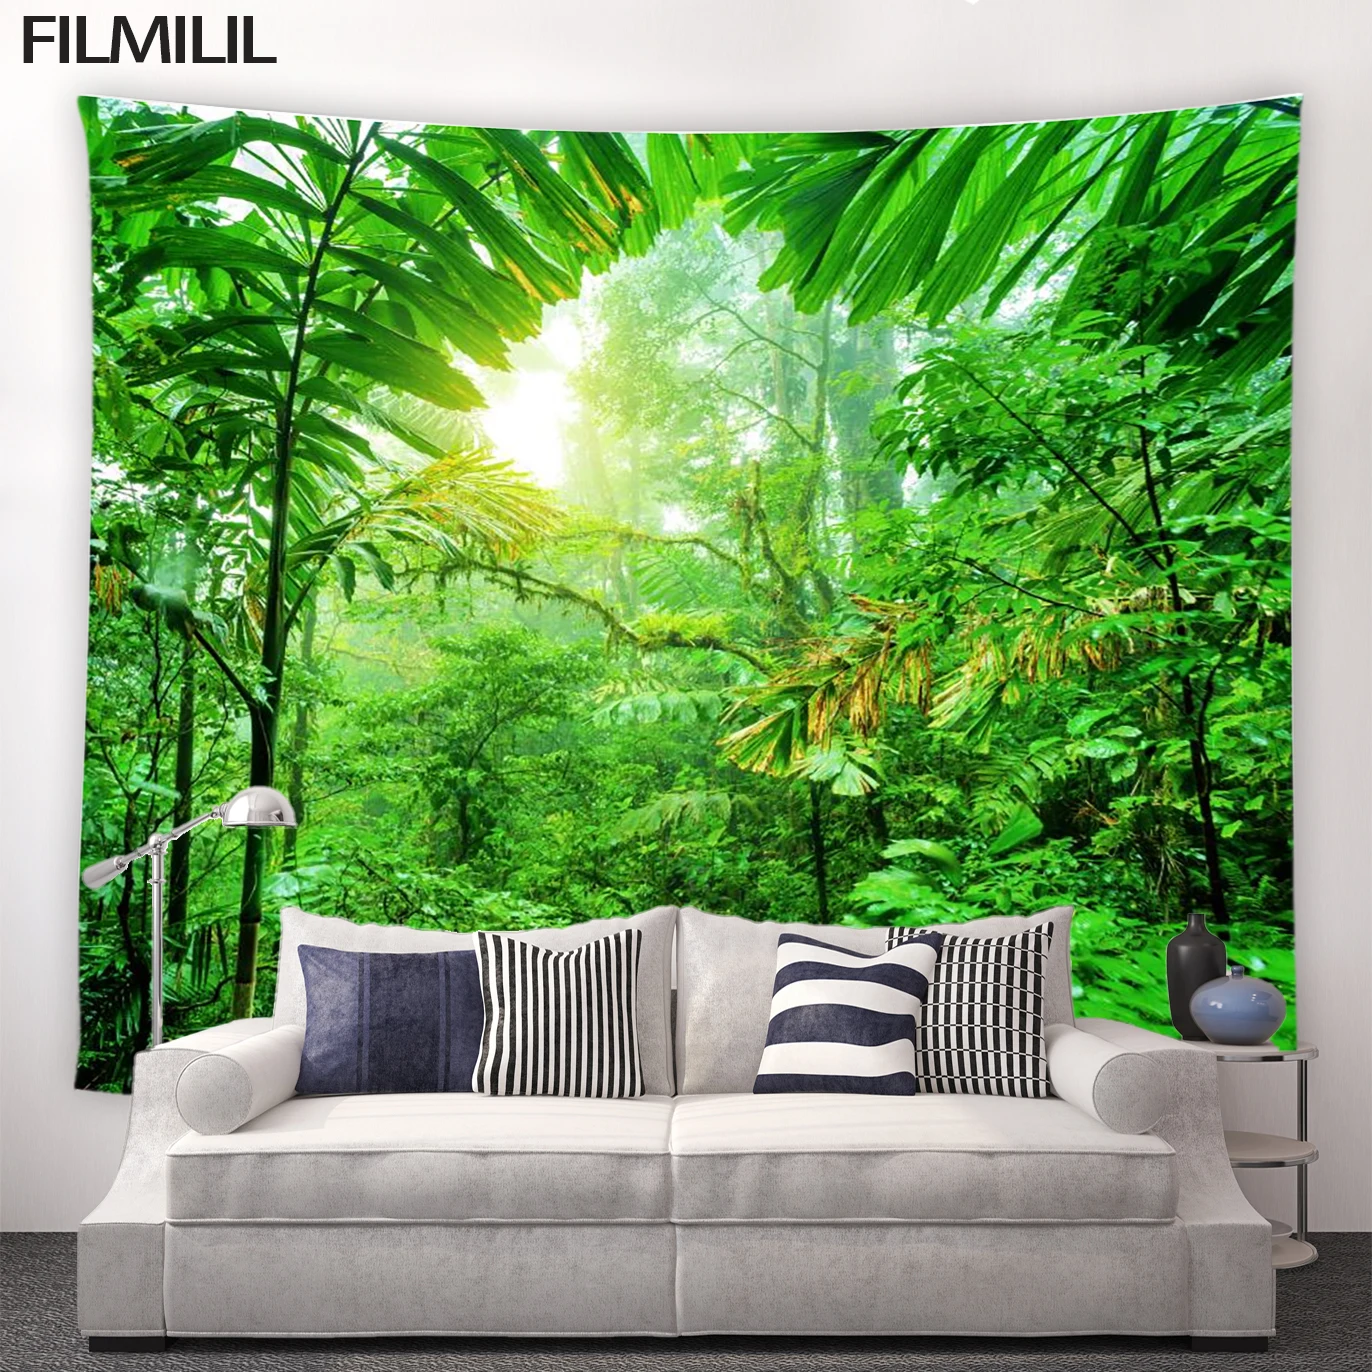 Forest Cave Waterfall Tapestry Green Trees Natural Scenery Tapestries Bedroom Dormitory Decor Wall Hanging Mural Screen Blanket